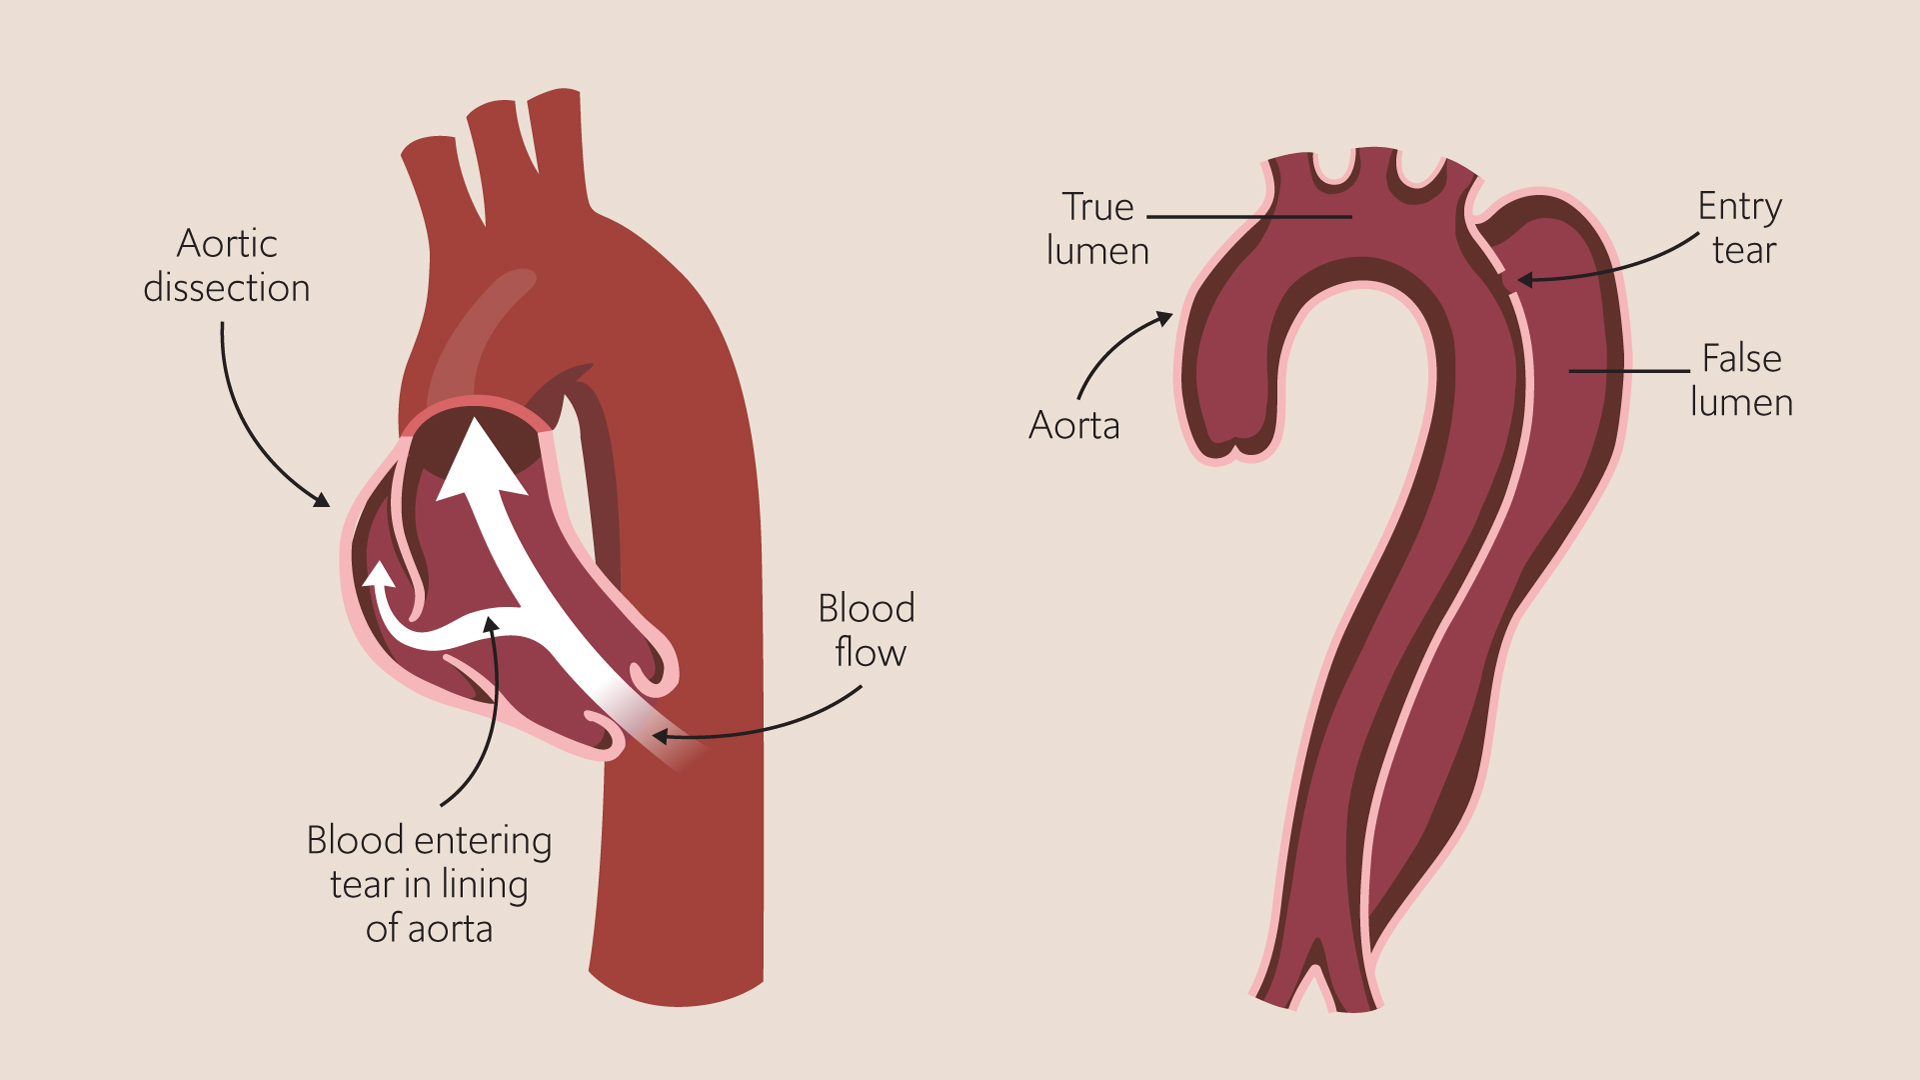 Aortic dissection and the false lumen